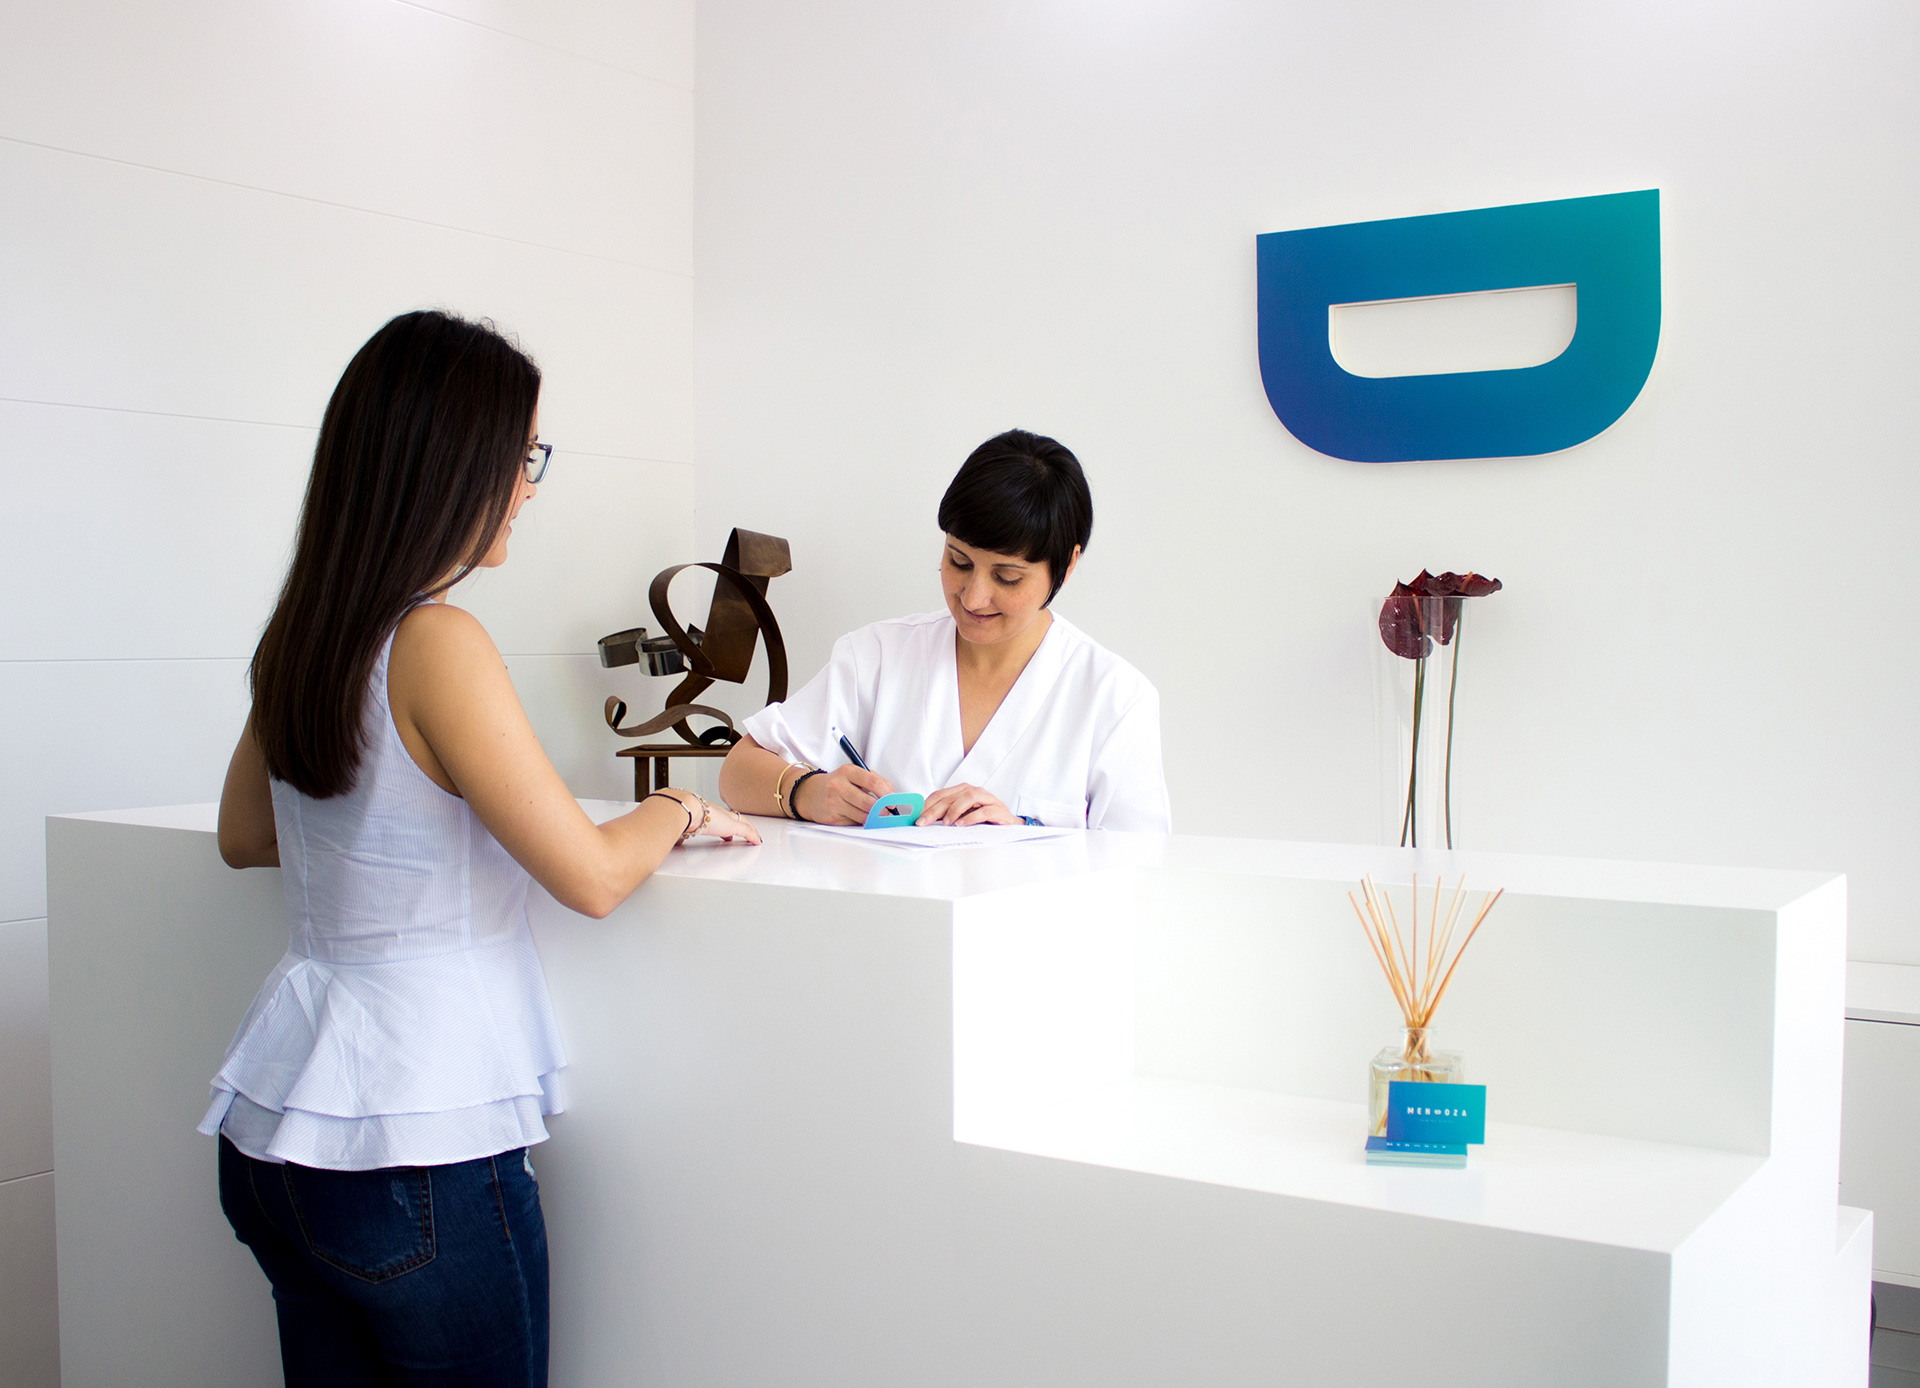 Centro Dental Mendoza by Chillypills - Creative Work - $i